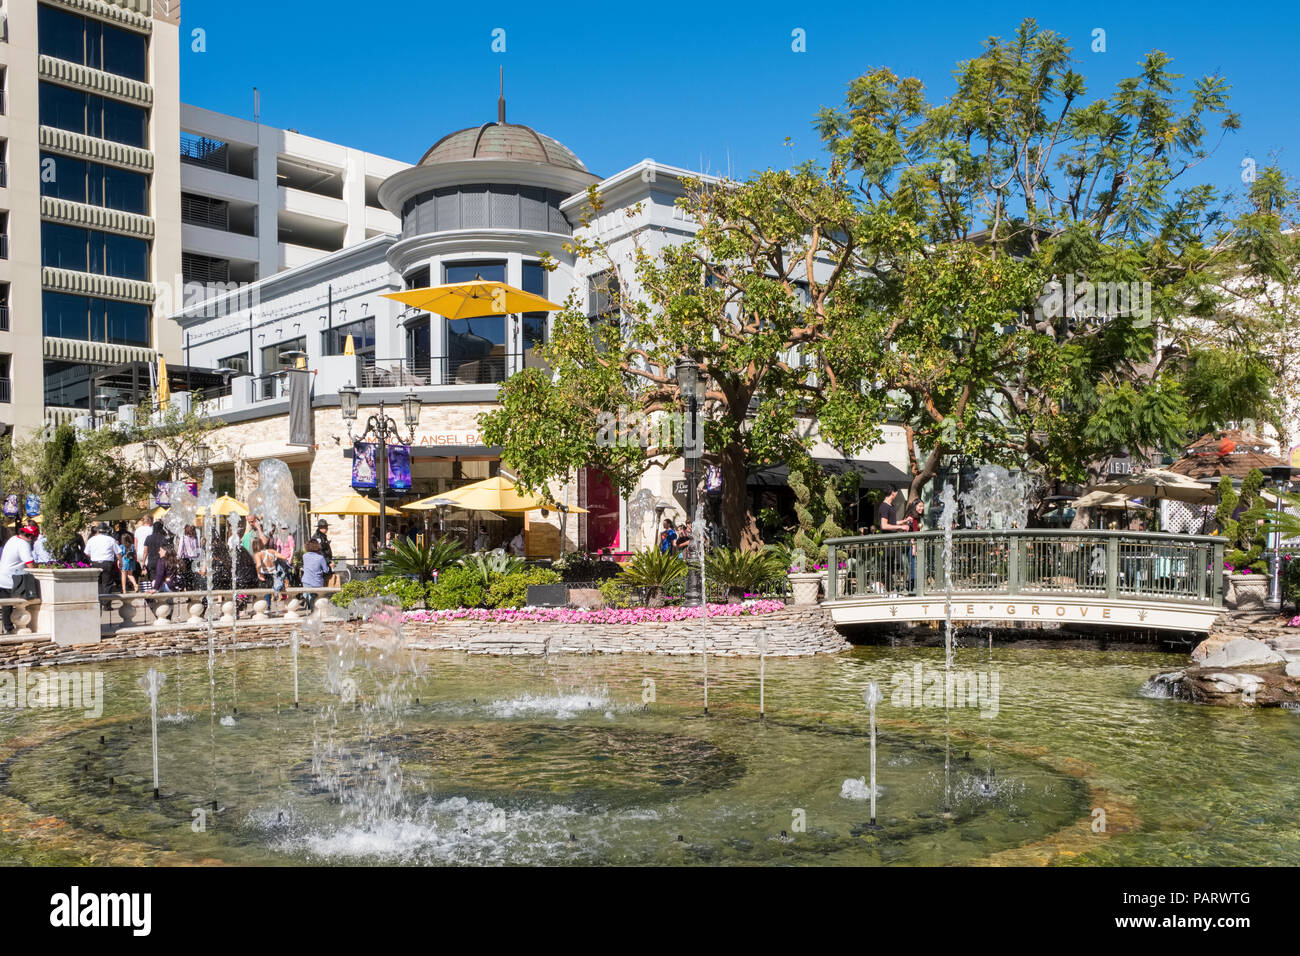 Fountain at the upmarket shopping mall, The Grove at the Farmers Market, Los Angeles, California, USA Stock Photo